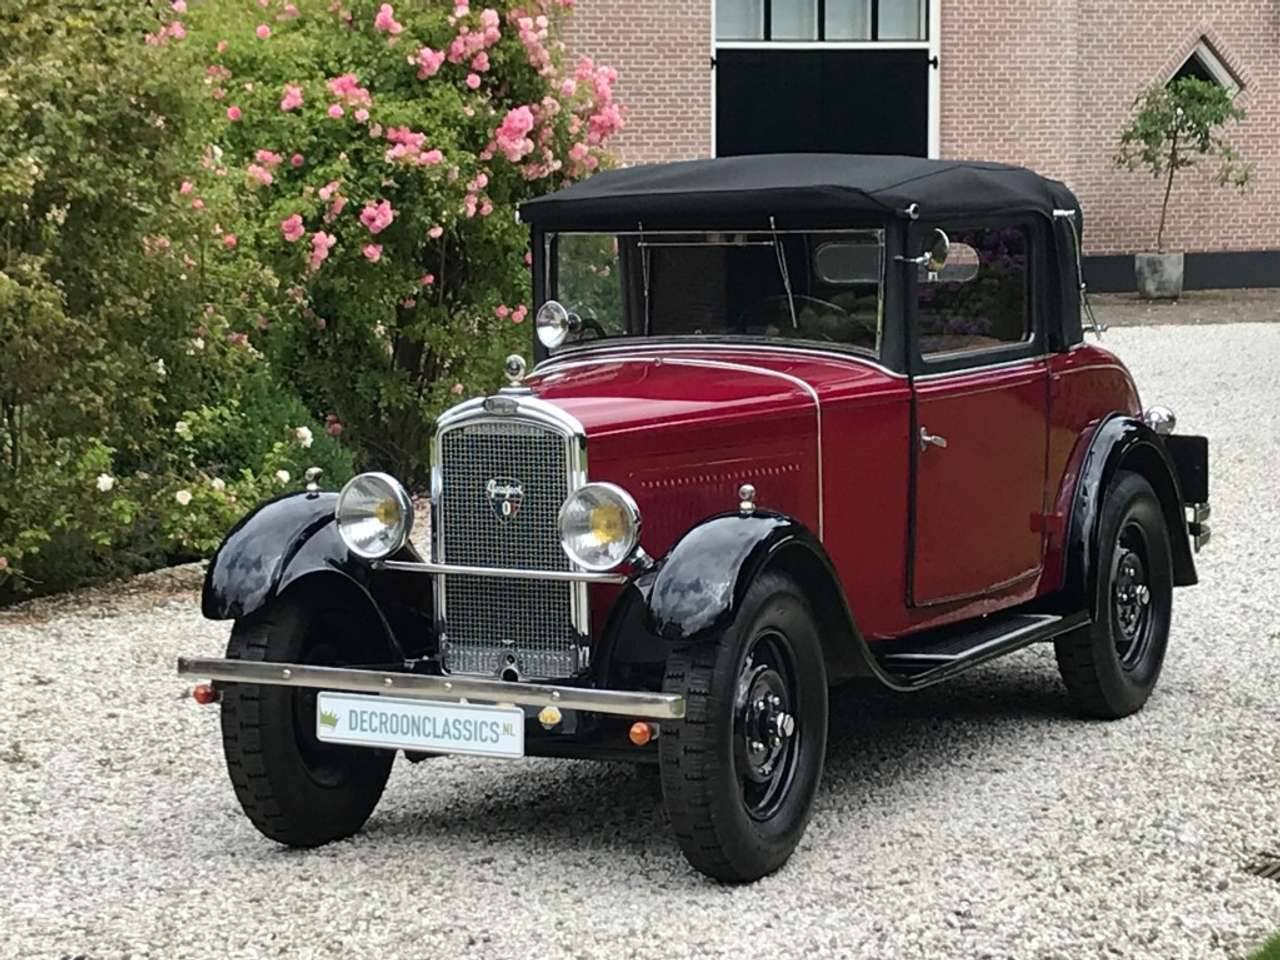 peugeot-201-classic-cars-for-sale-classic-trader